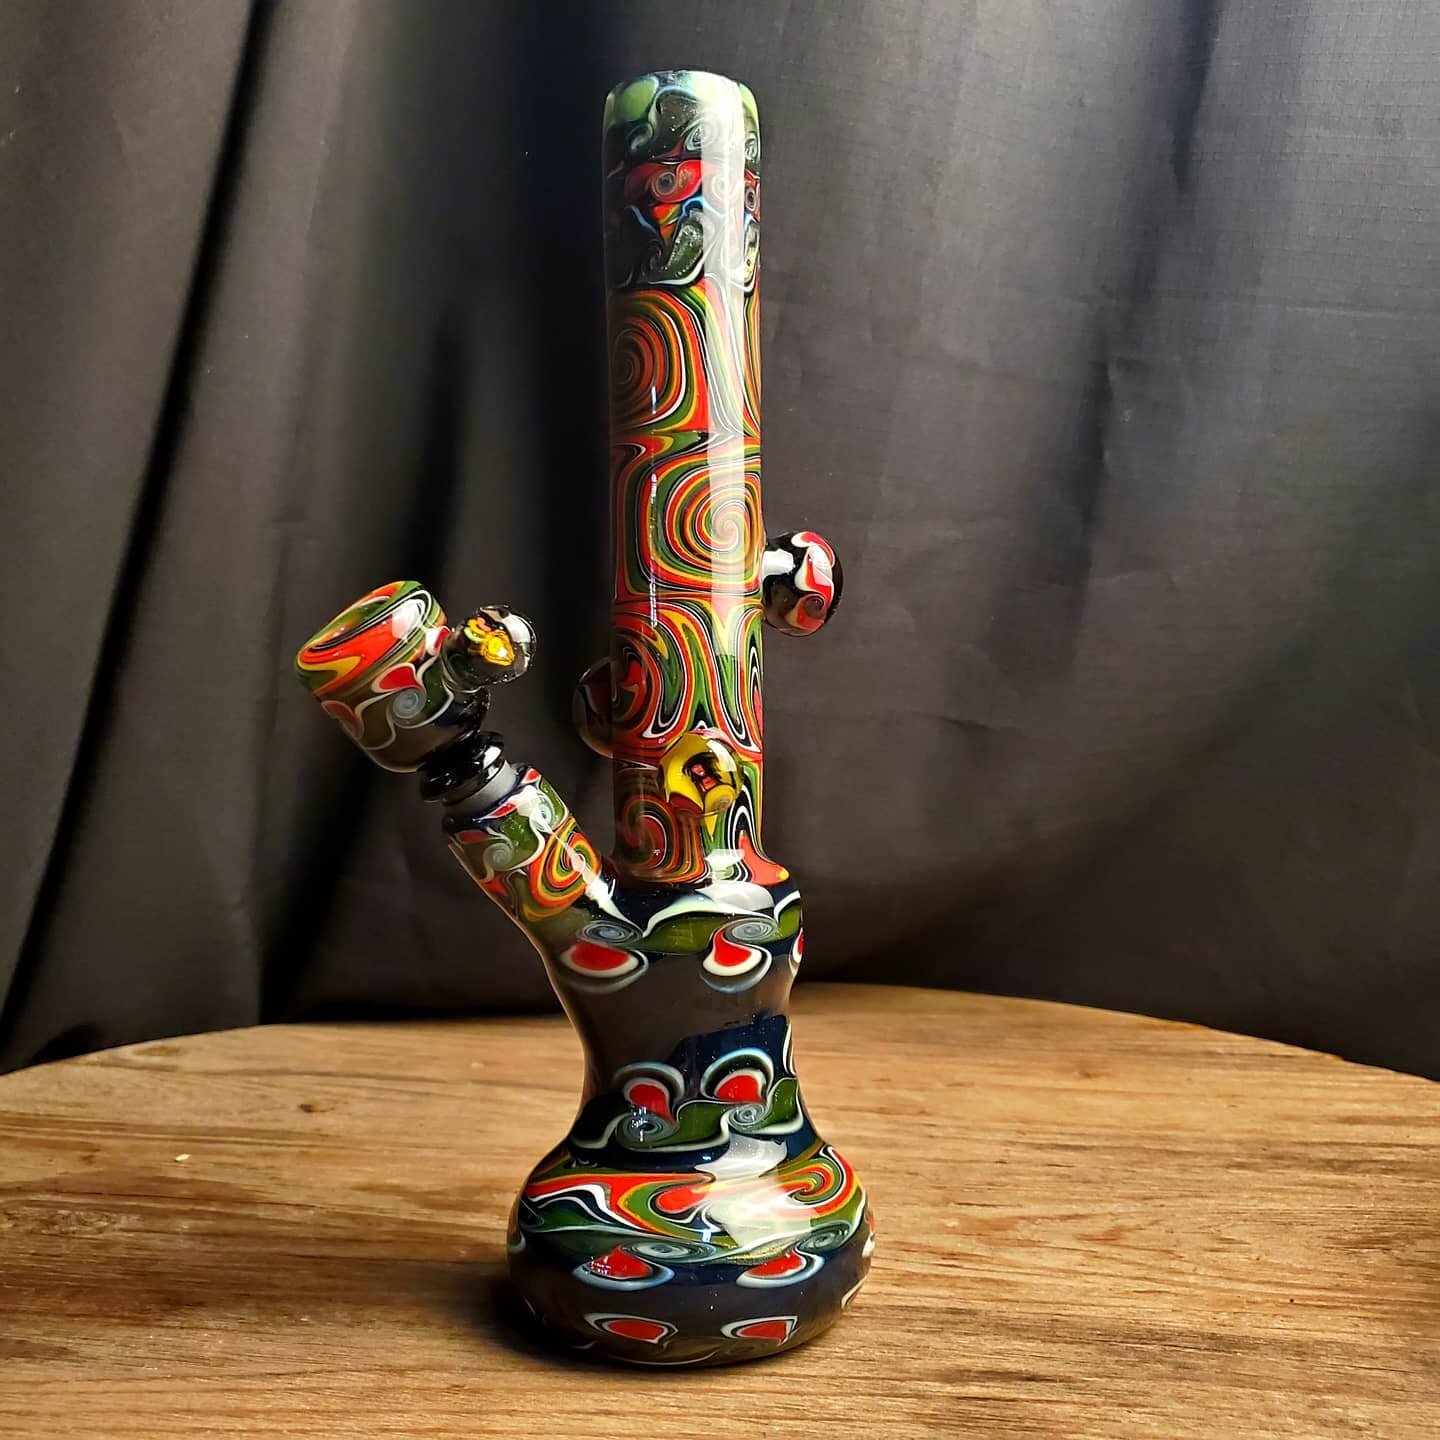 Unbelievably excited about this super fun rasta bong! 14 inch fully  hand worked 19 sections with some cool beanz rasta marble bling for the full deluxe all the bells n whistles feel. 
These pieces are an incredible personal challenge of wrestling ho